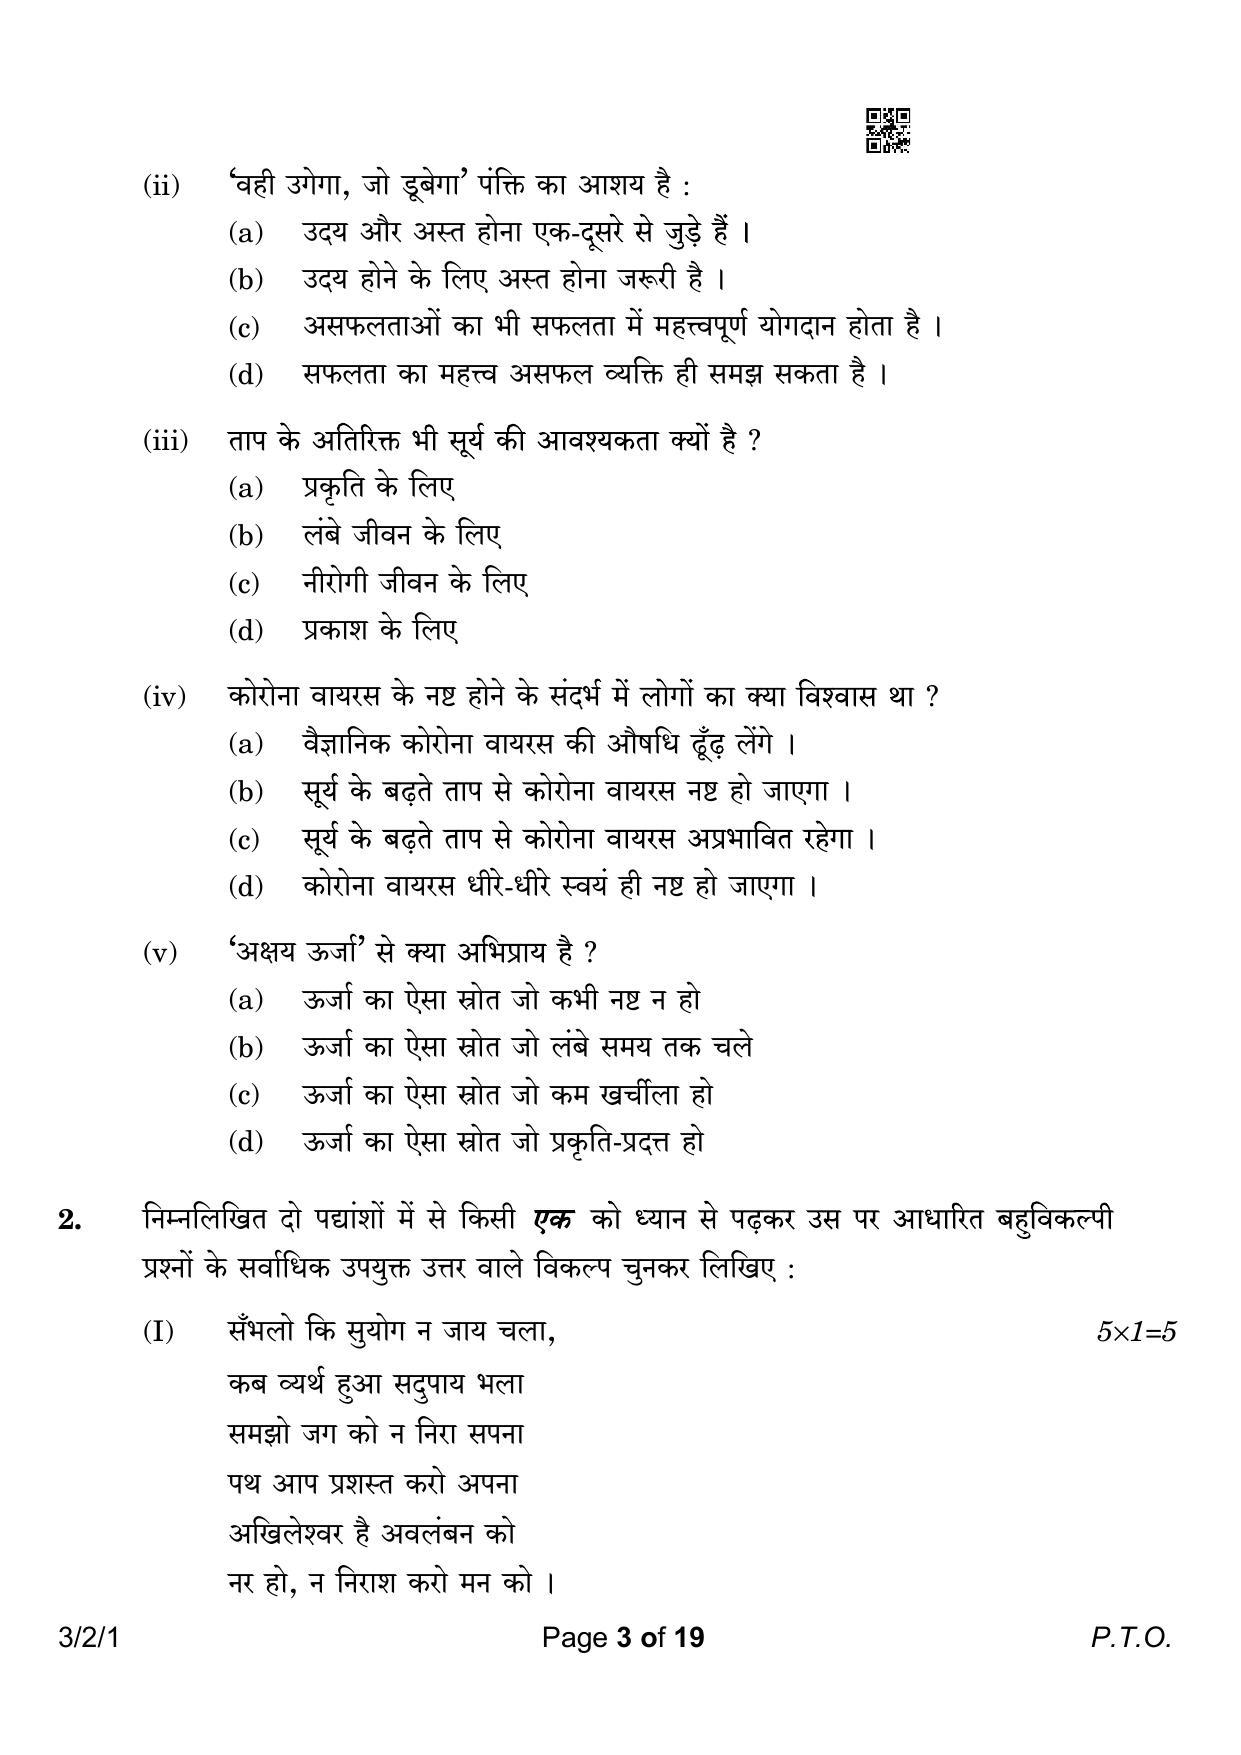 CBSE Class 10 3-2-1 Hindi A 2023 Question Paper - Page 3